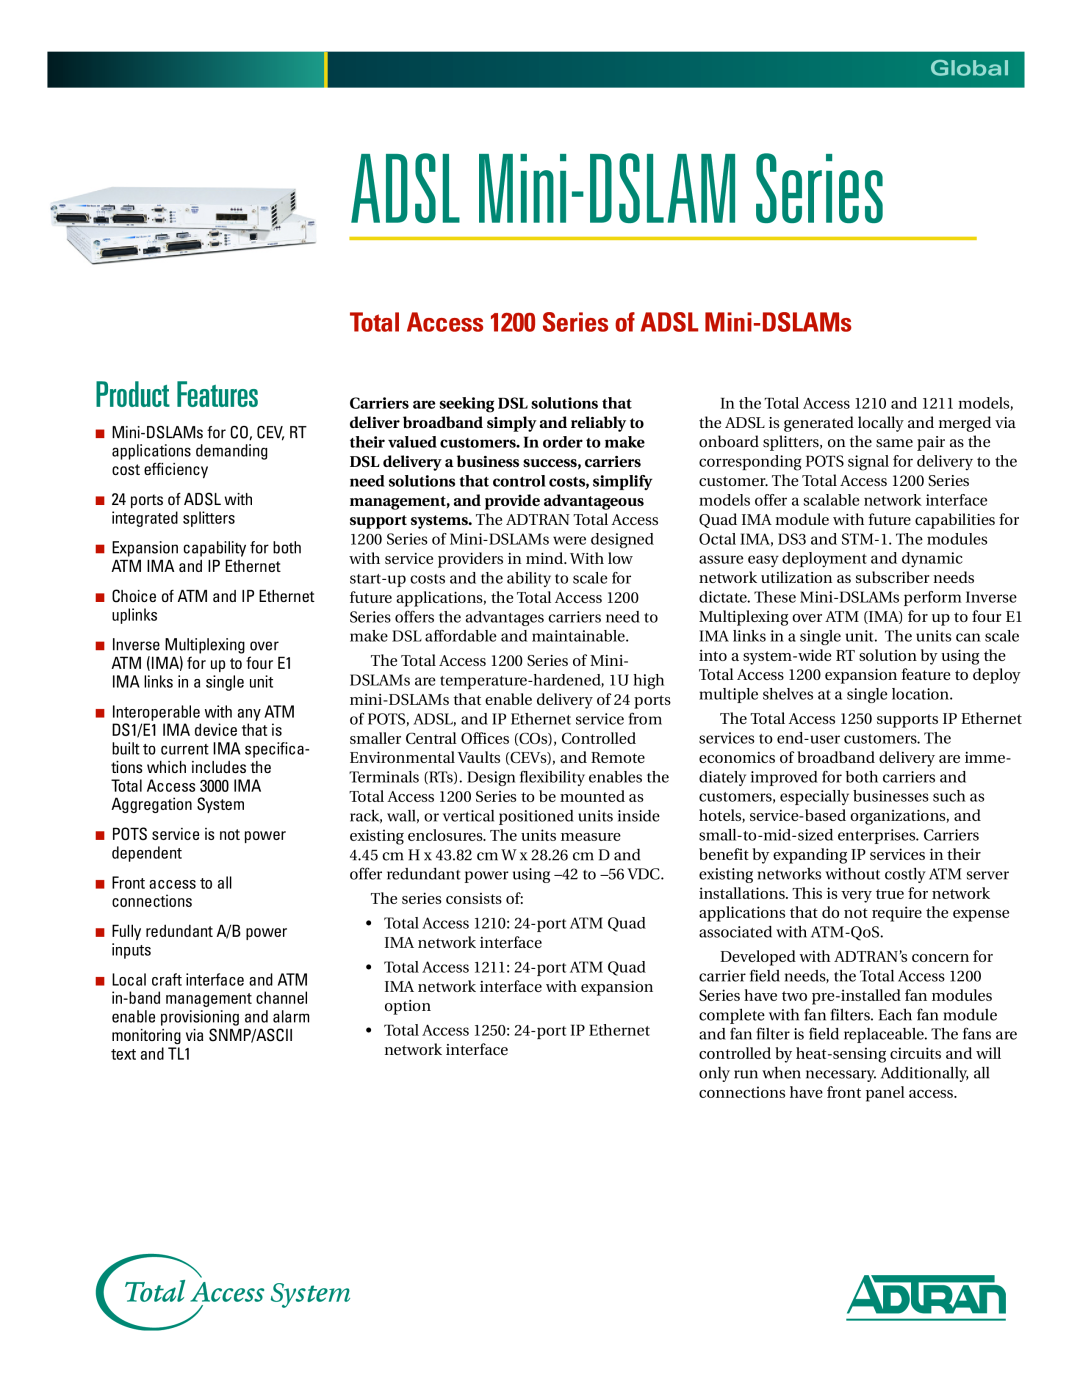 ADTRAN specifications Total Access 1200 Series of ADSL Mini-DSLAMs, ADSL Mini-DSLAM Series, Product Features, Global 